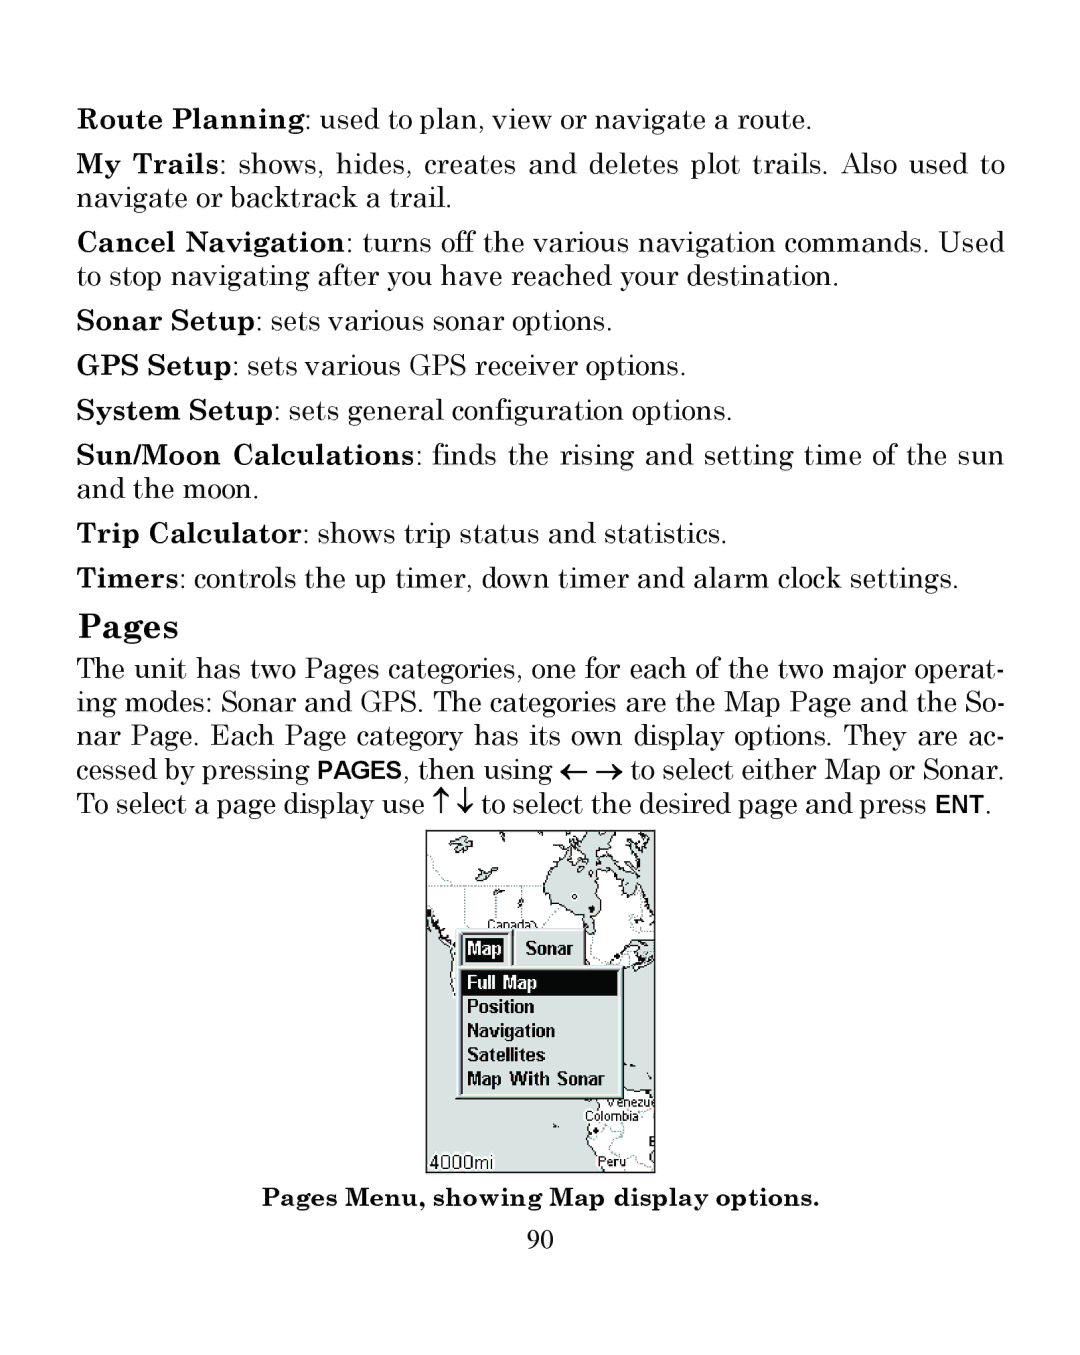 Eagle Electronics 350 S/MAP manual Pages Menu, showing Map display options 